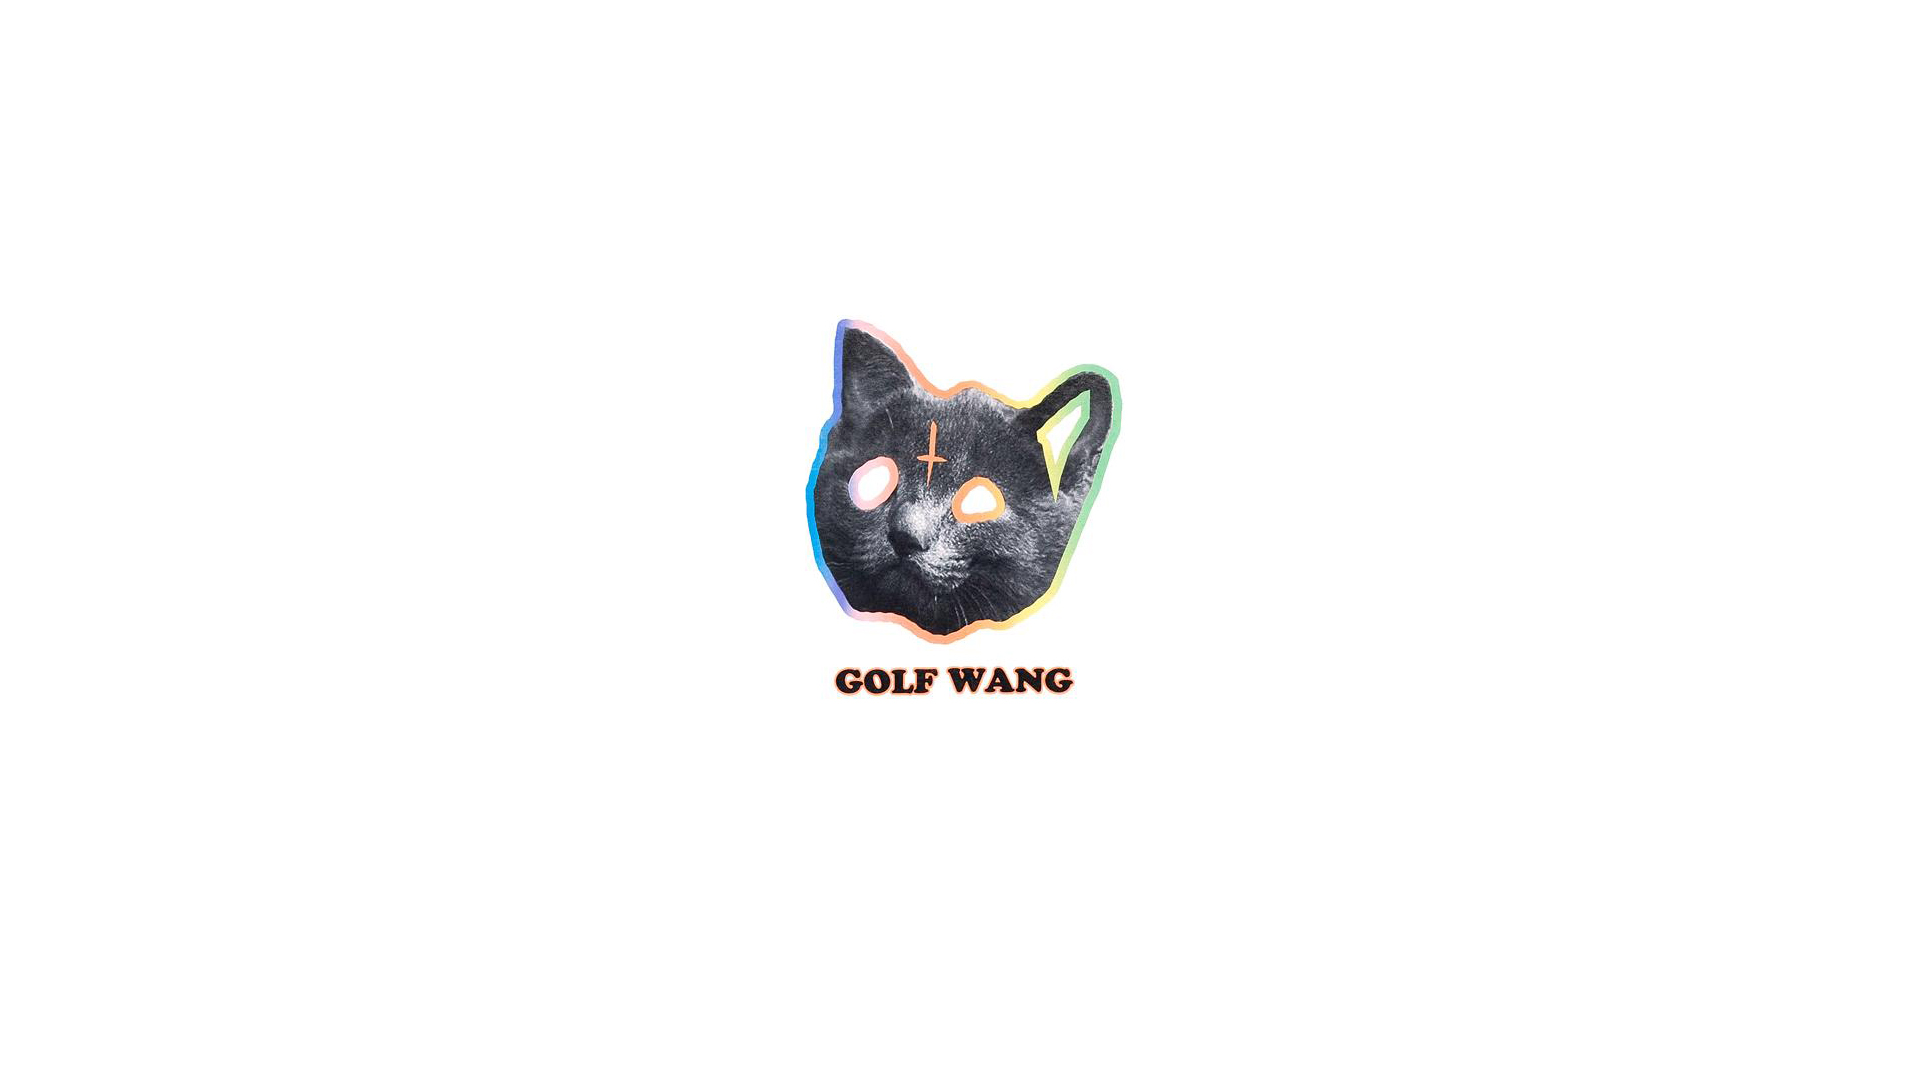 7 Odd Future HD Wallpapers | Backgrounds - Wallpaper Abyss